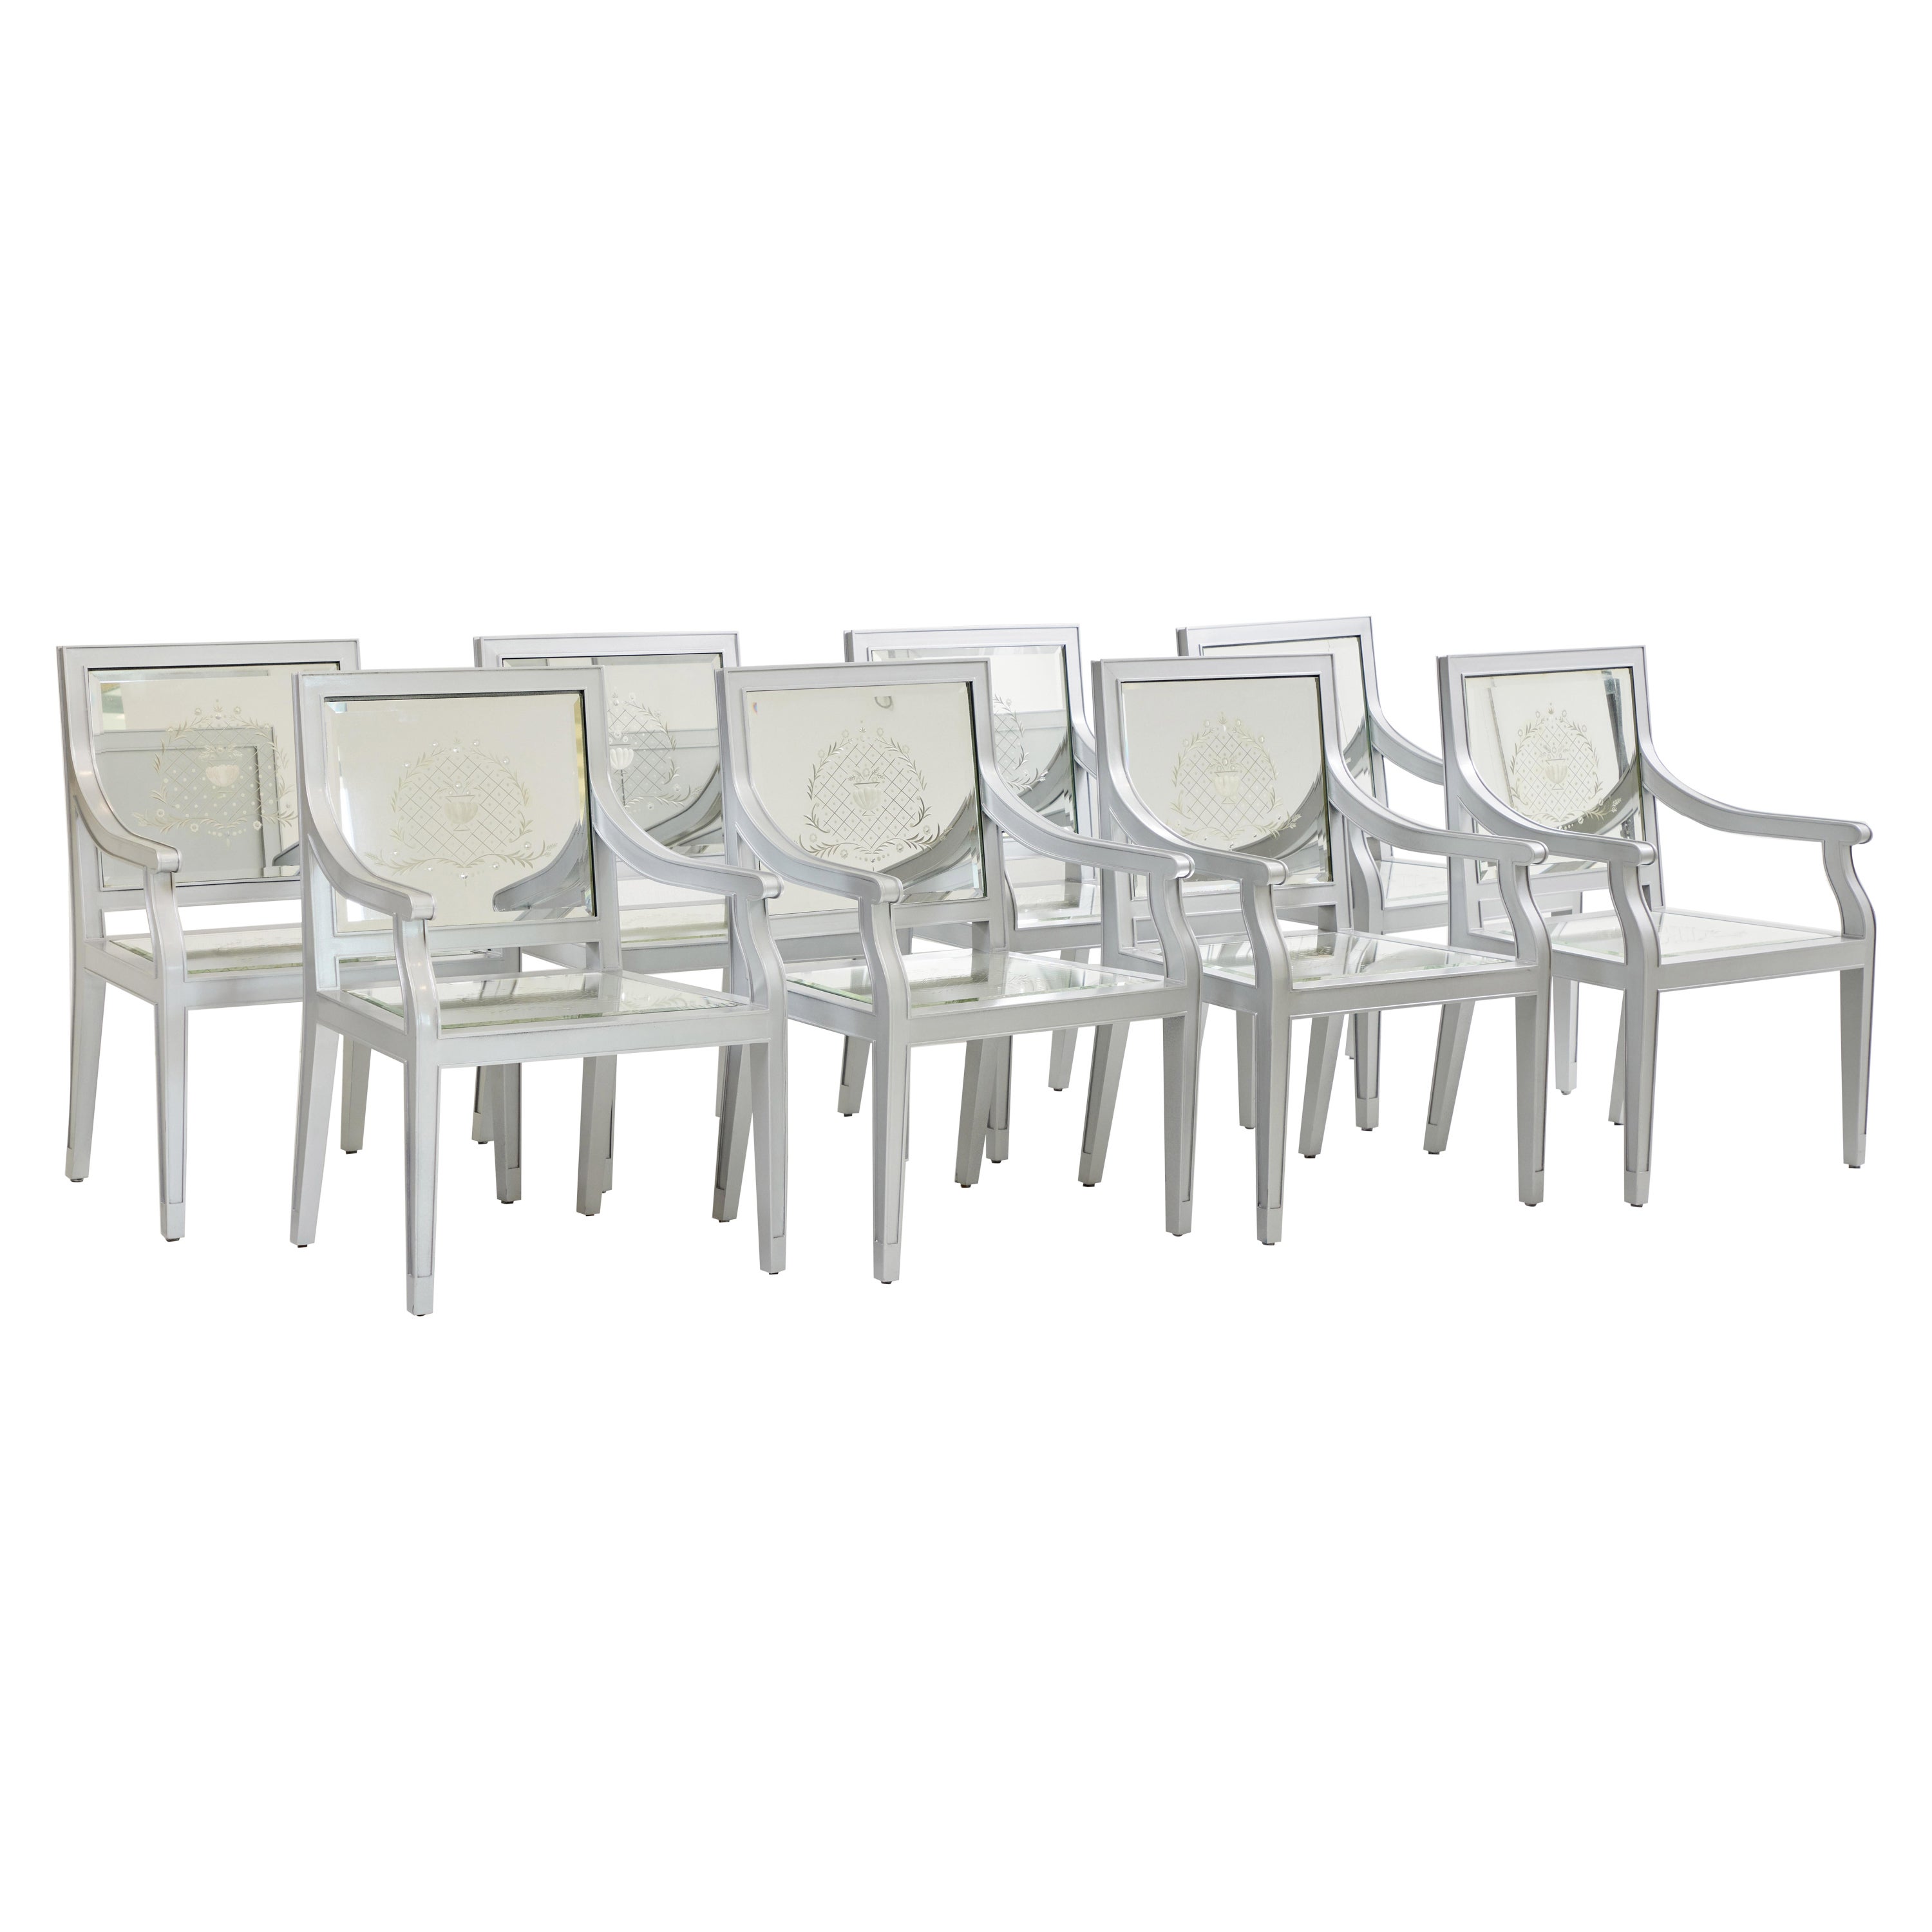 Pair of Mirrored Dining Chairs by Philippe Starck For Sale